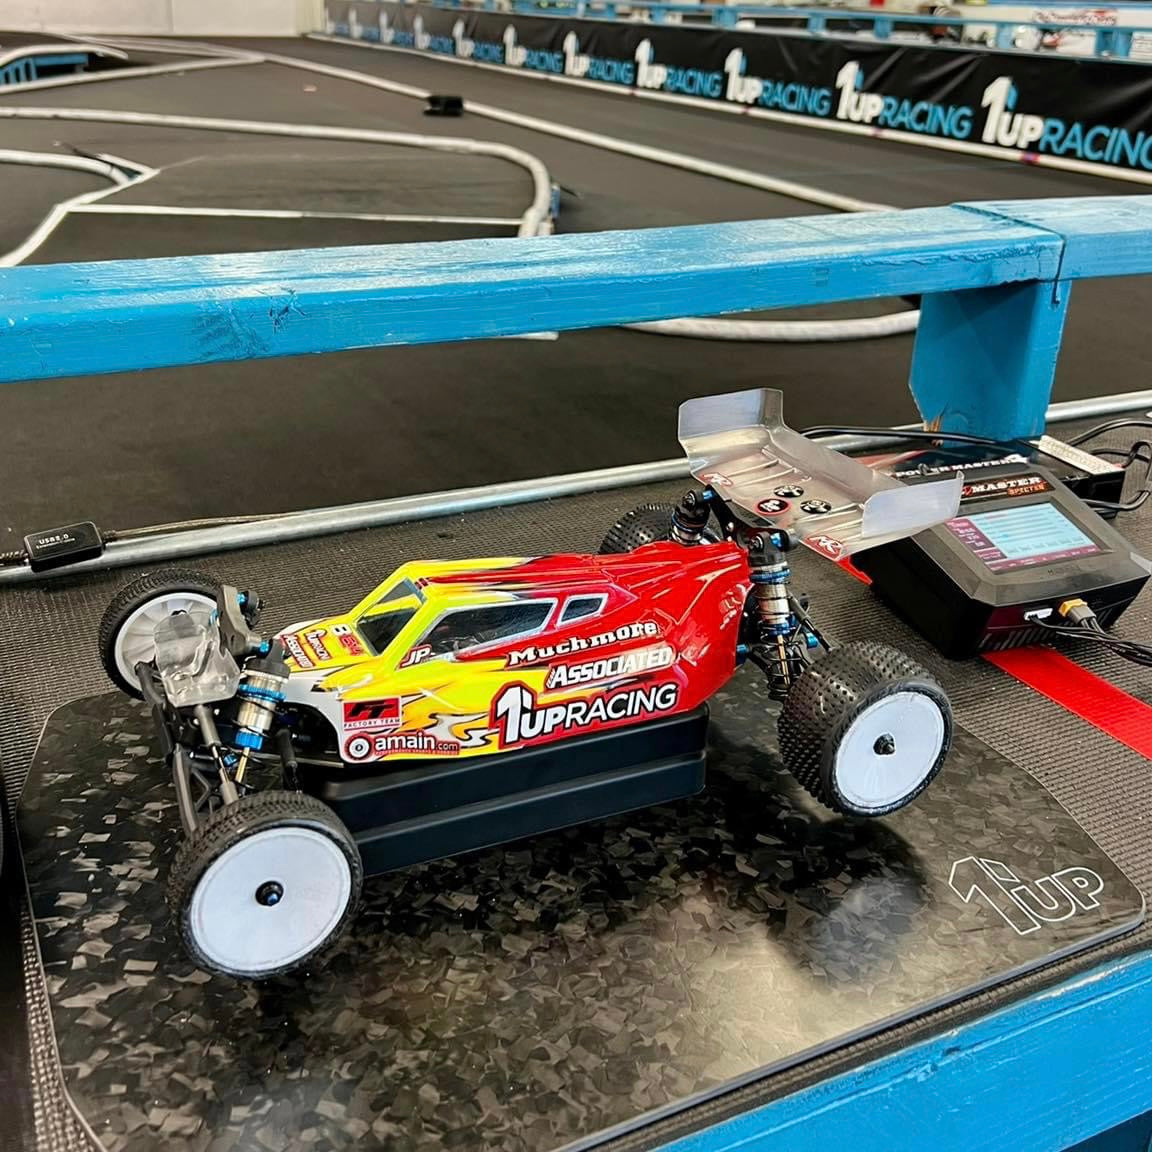 JP putting in some hot laps at PDX RC Underground